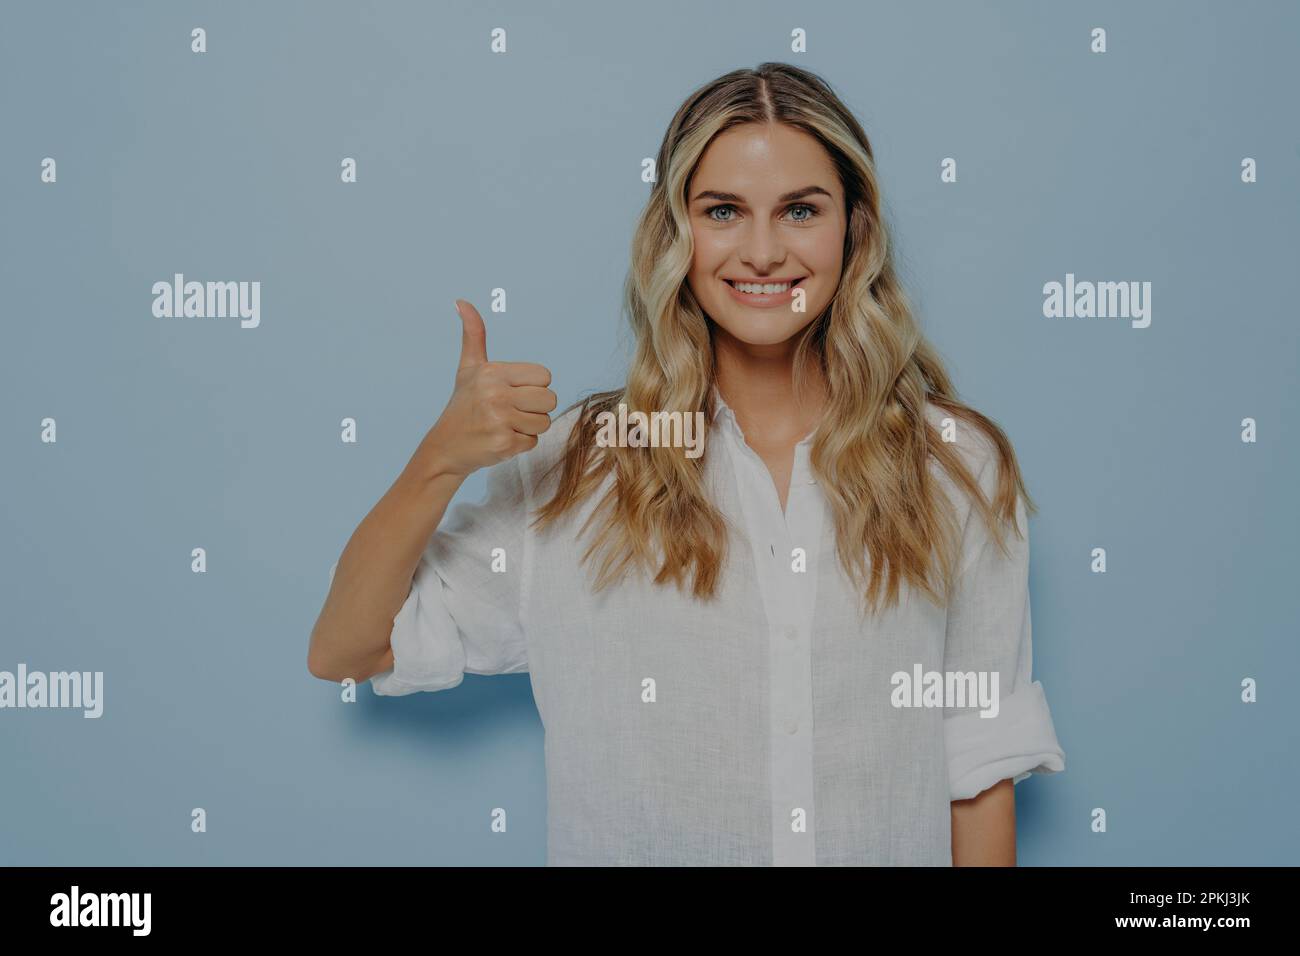 Cheerful blonde girl in white shirt showing thumbs up gesture with her hand while smiling, admitting that she liked that, standing alone next to blue Stock Photo